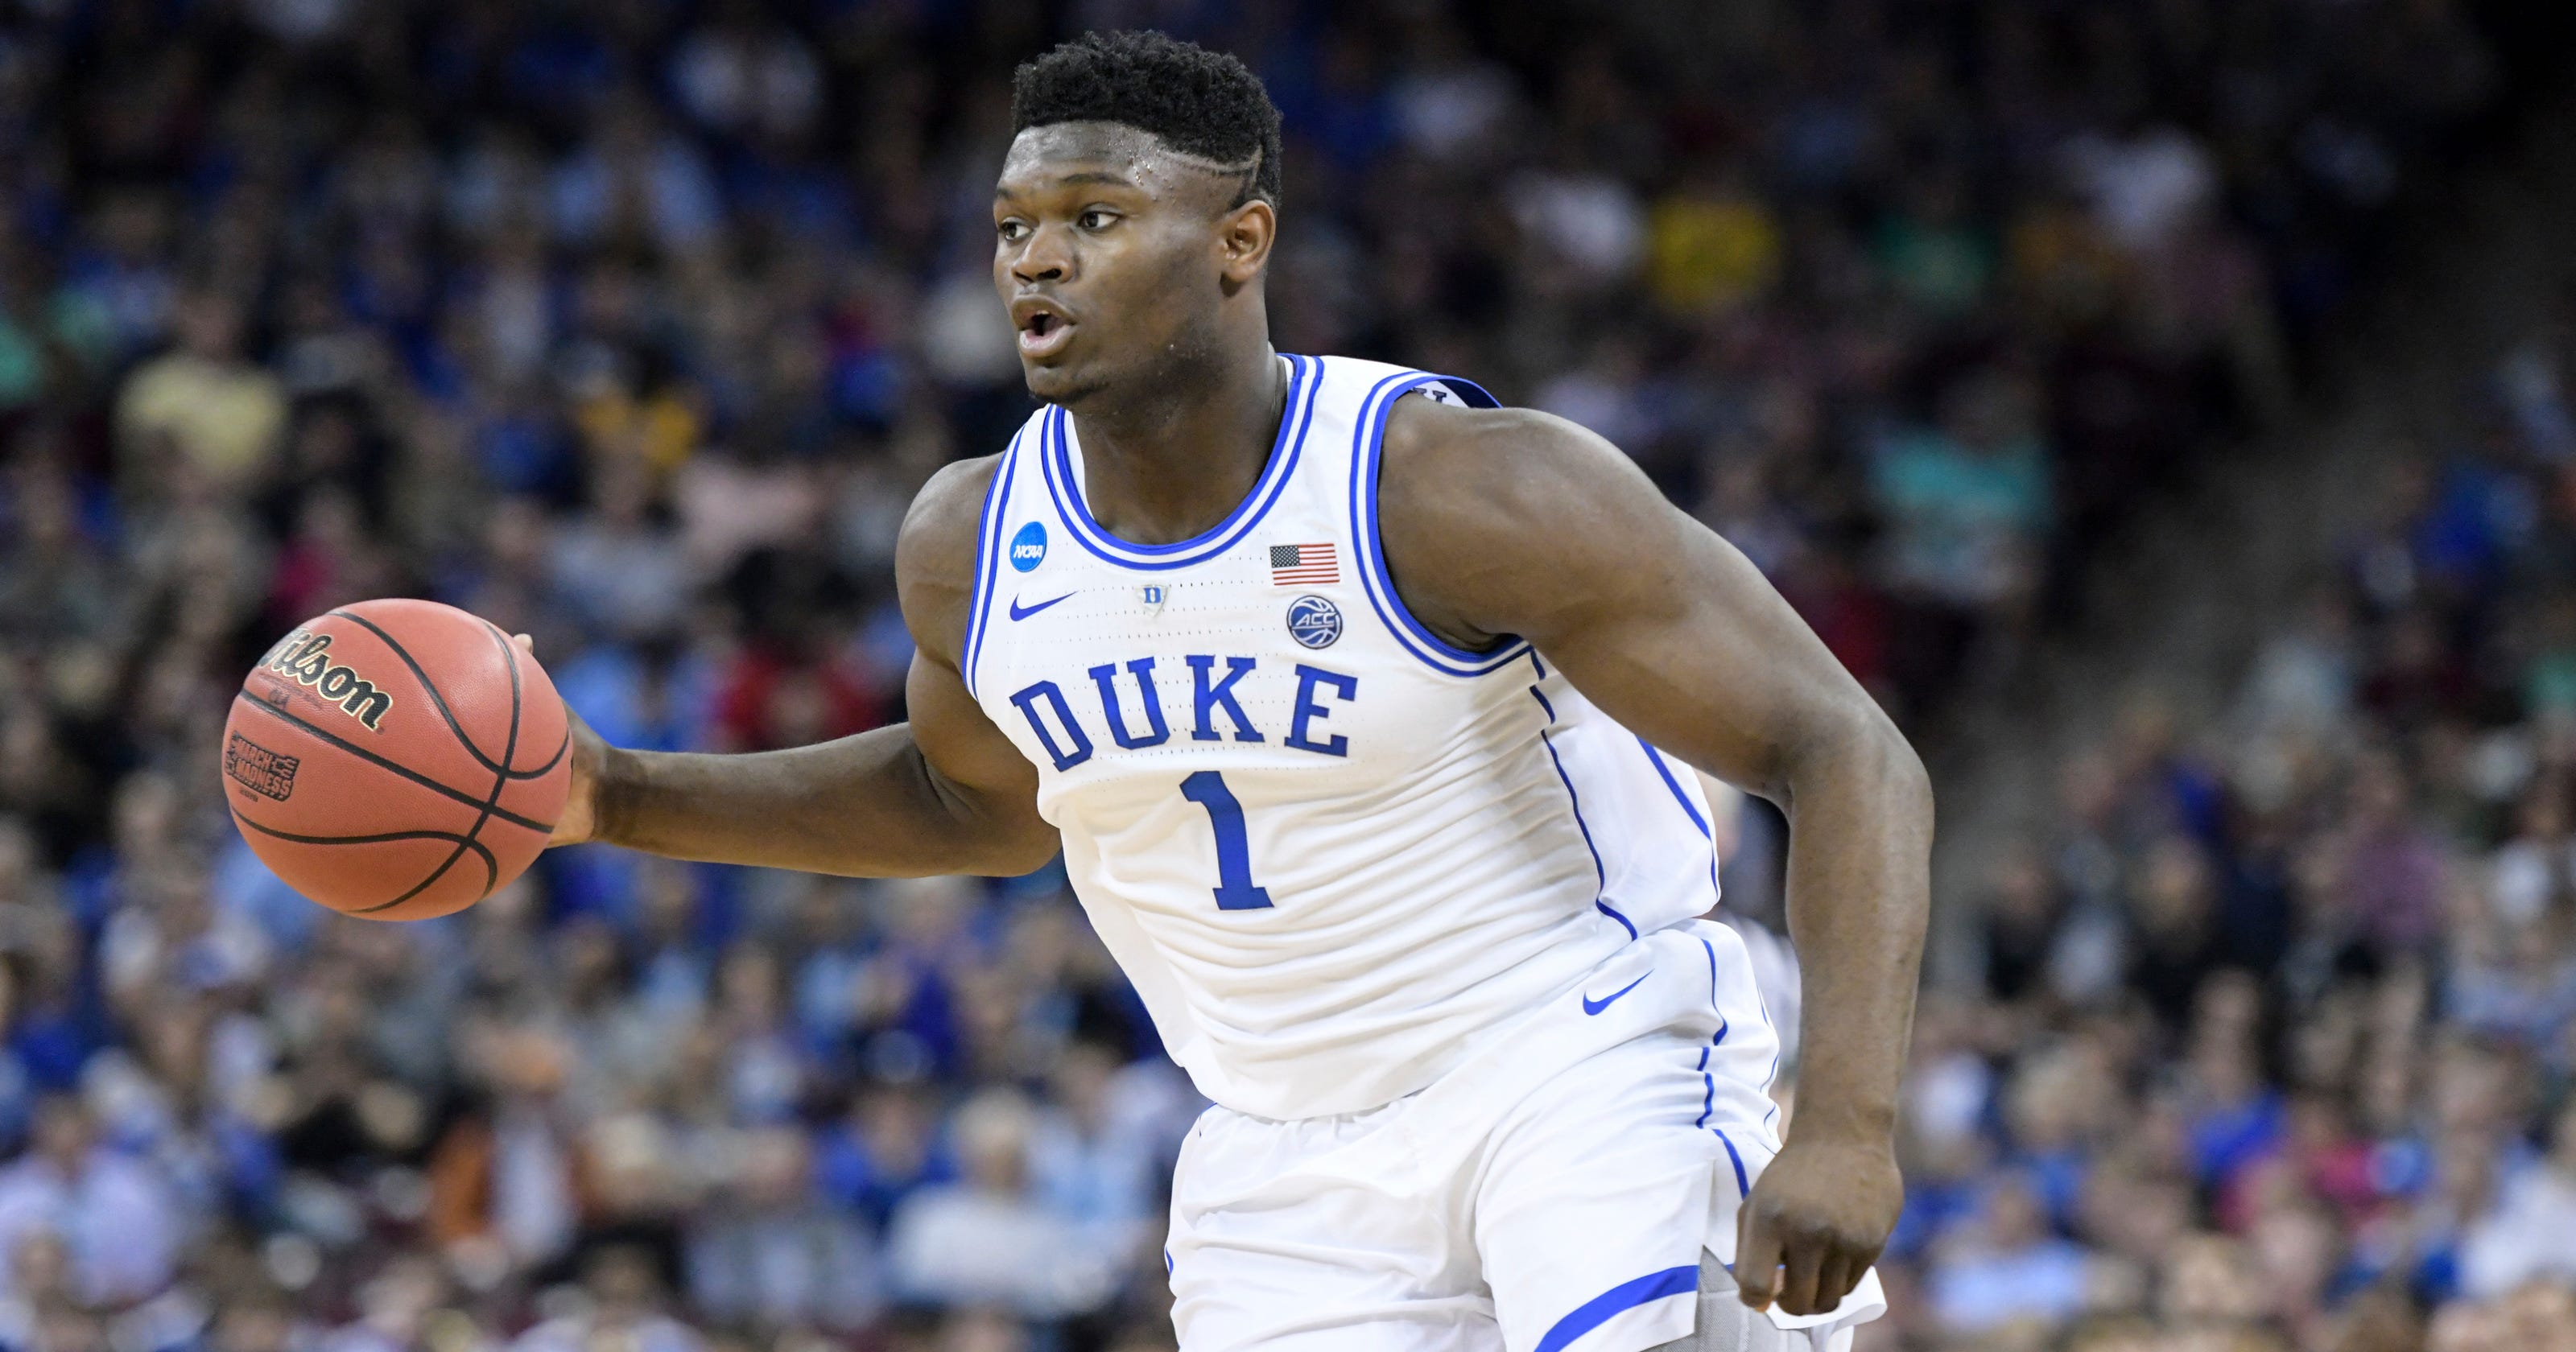 Duke’s Zion Williamson named AP player of the year